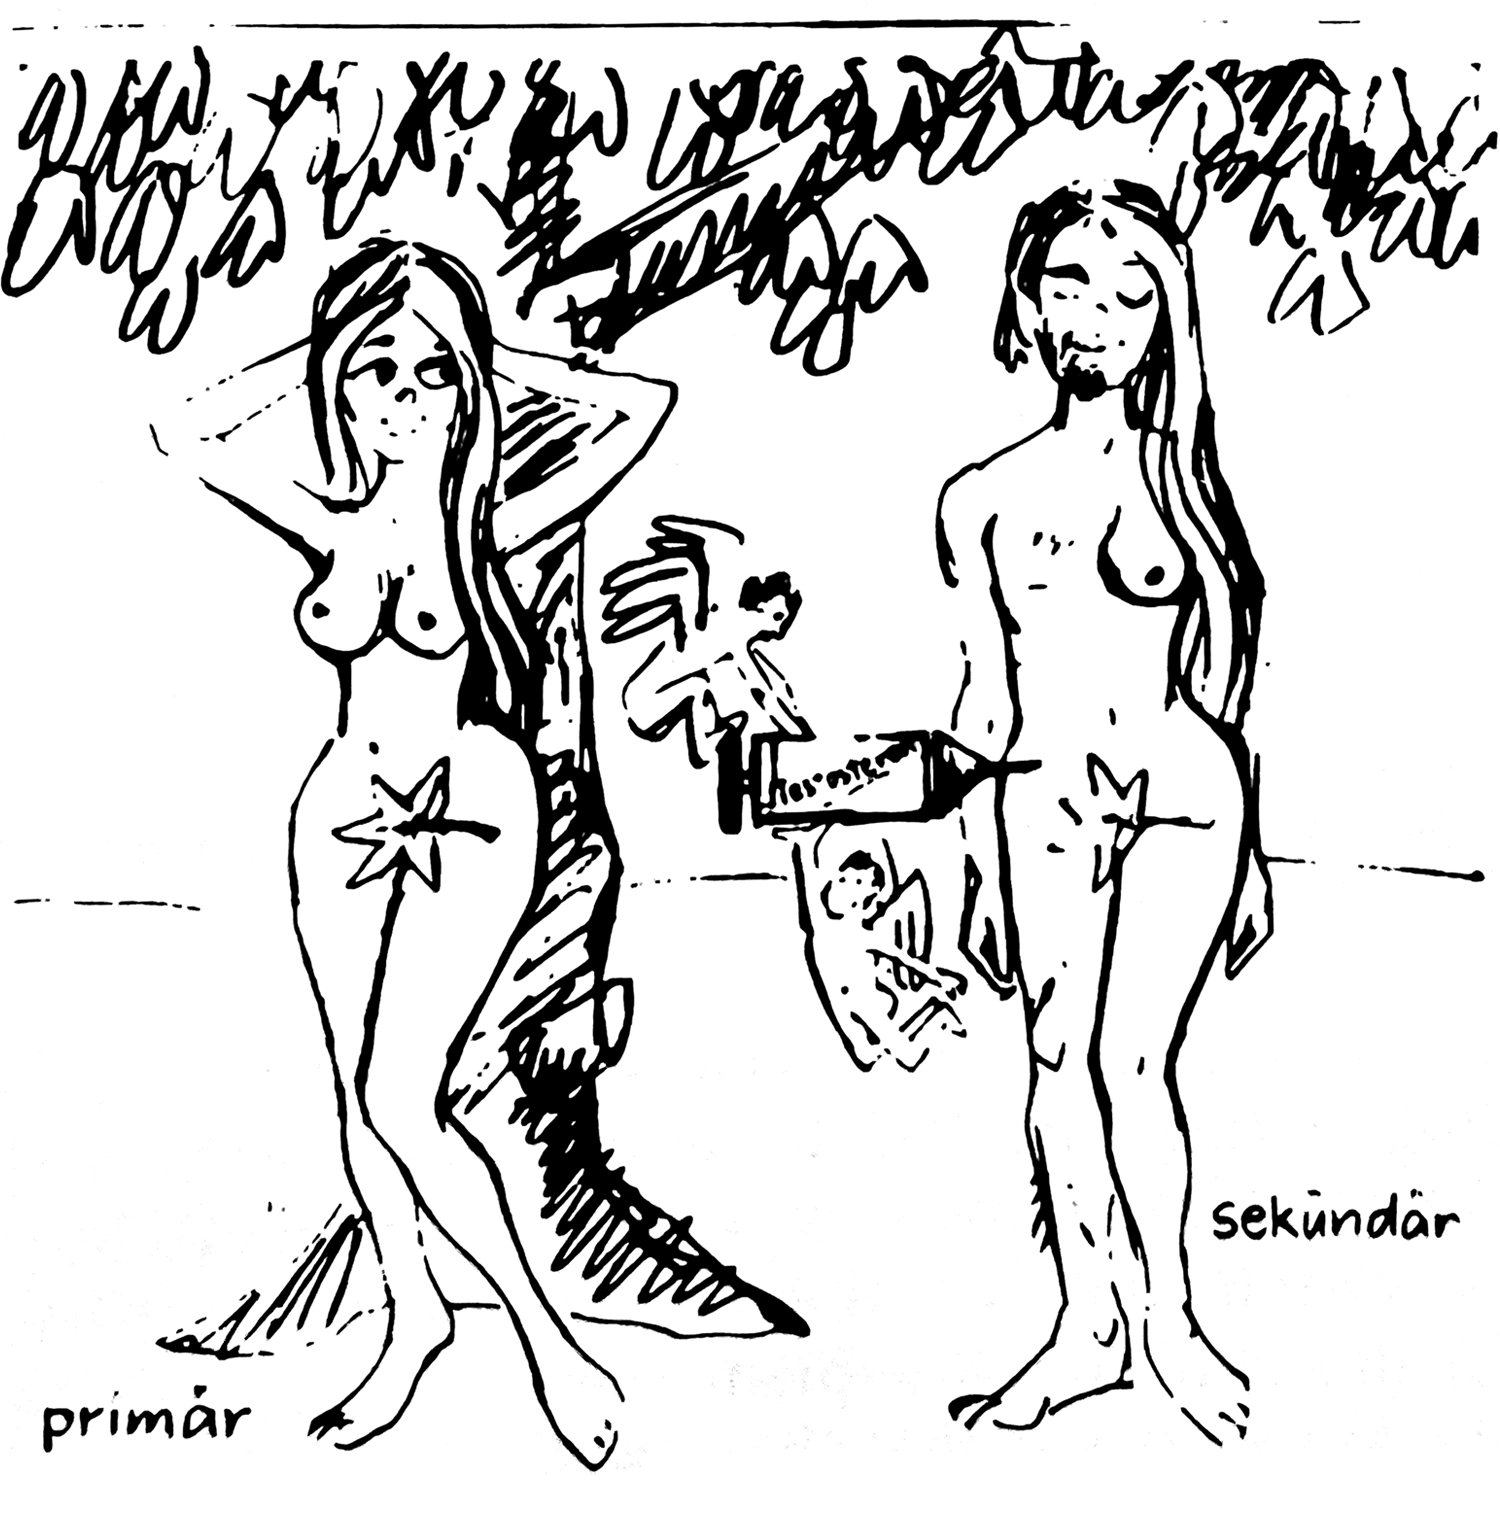 A two-part comic. In the first part Adam is seated beneath a tree with a stitched up incision beneath his ribs. Beneath him it says “primar.” Above him a bone is transforming into Eve. Little angels are helping with this. Beneath her it says “sekundar.” In the second comic, Eve leans against the tree, beneath her it says “primar.” Standing next to her stands Adam, half male, half female, whom the angels are injecting with testosterone. Beneath “him” it says “sekundar”.